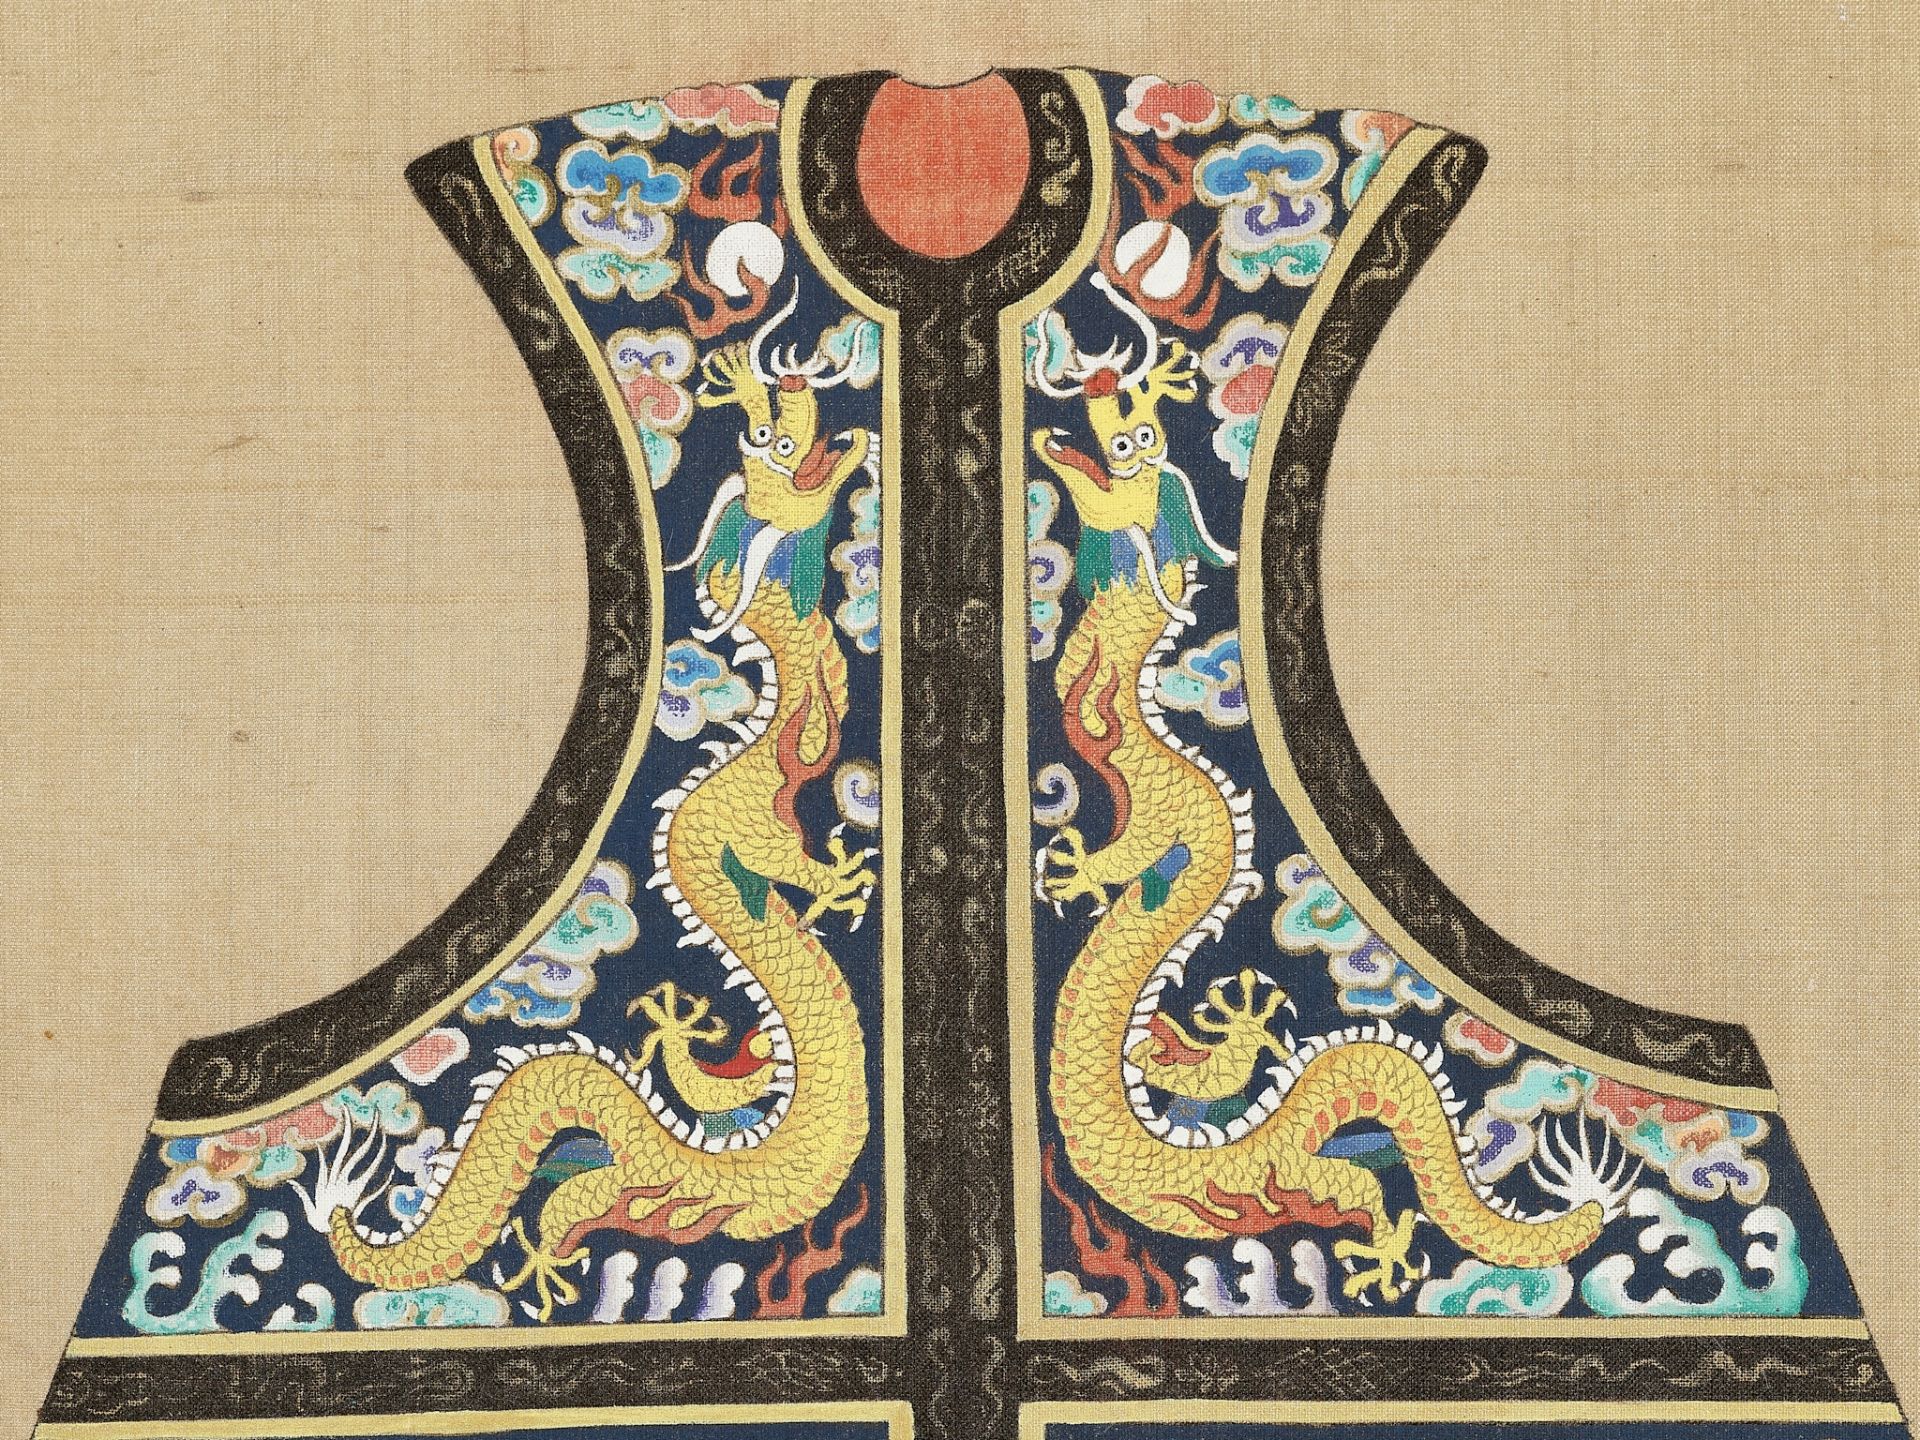 A RARE AND IMPORTANT ALBUM LEAF FROM THE HUANGCHAO LIQI TUSHI WITH AN IMPERIALLY INSCRIBED SILK PAIN - Image 12 of 21